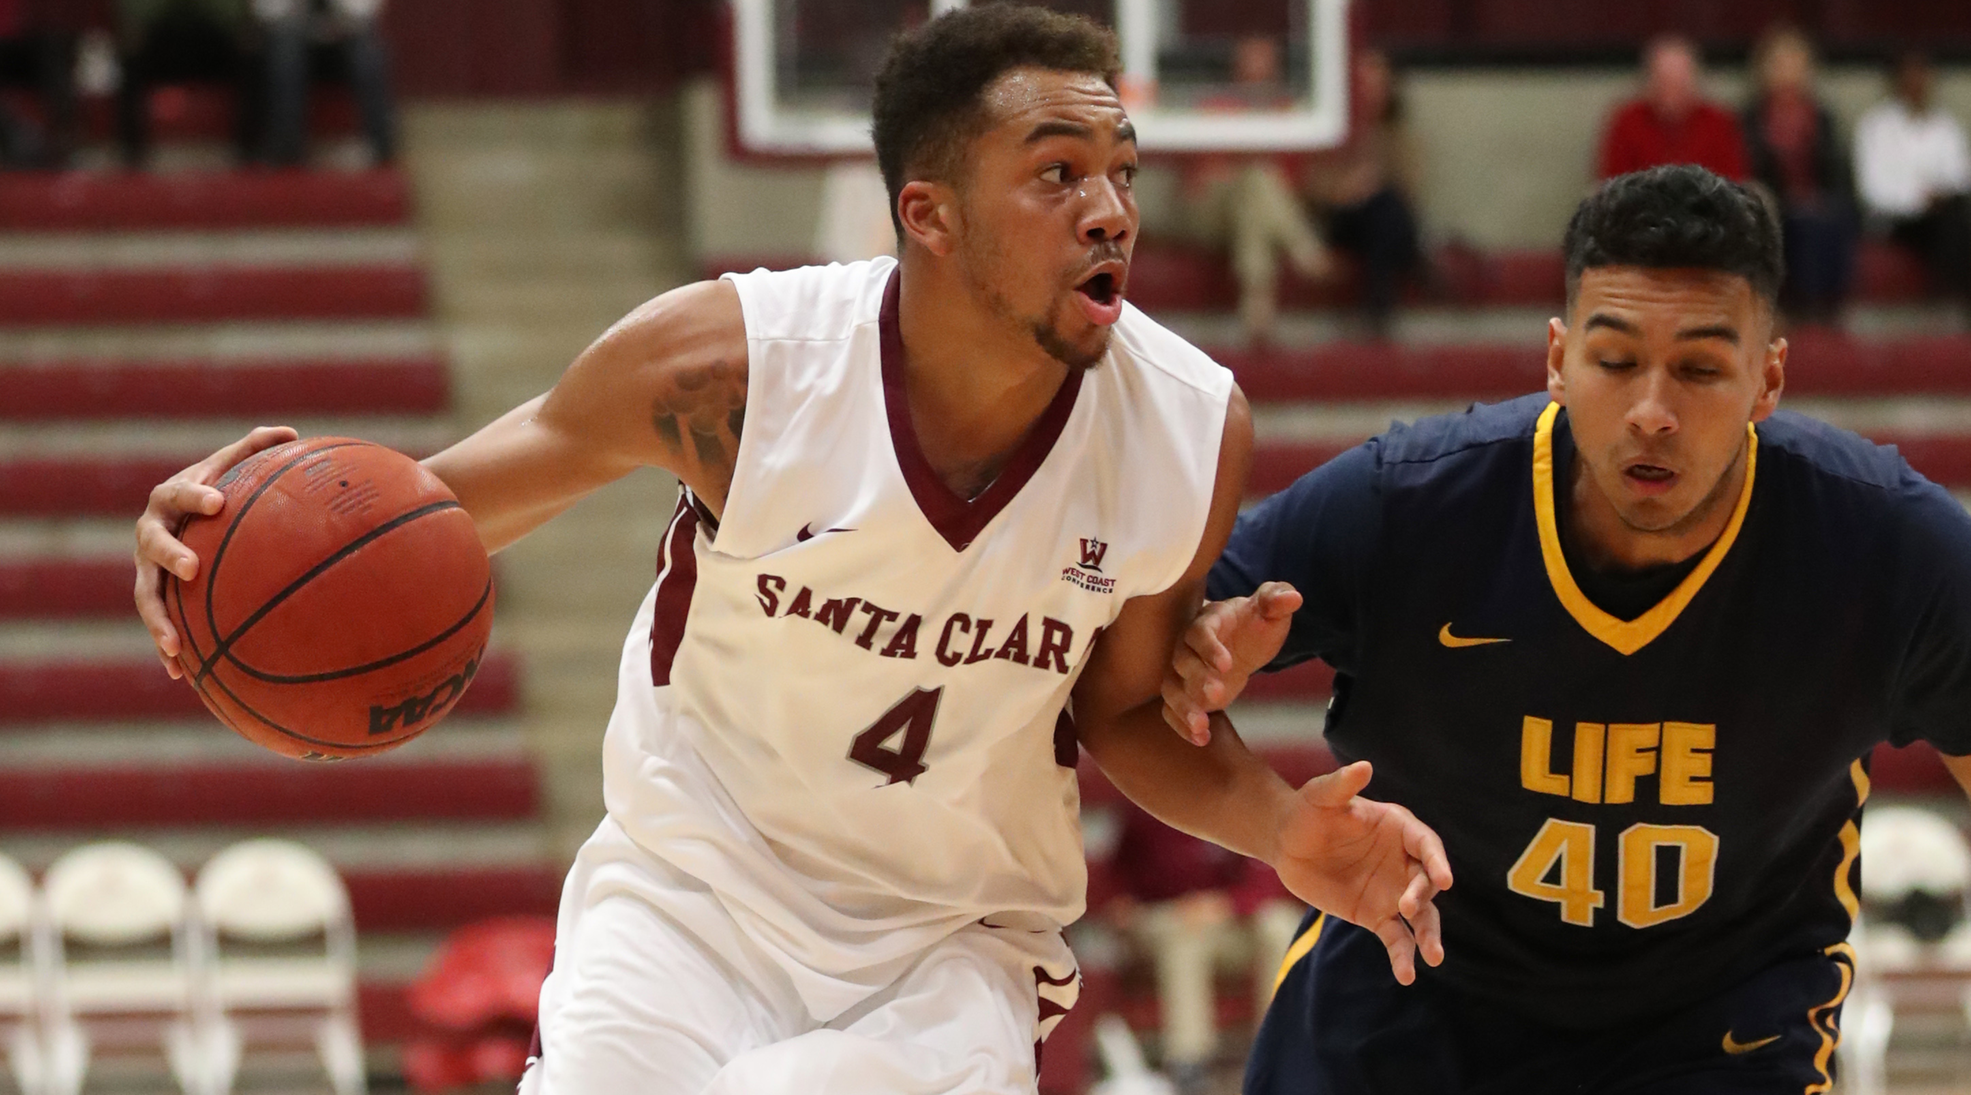 Men’s Basketball Downs Life Pacific, 83-65, in Saturday’s Exhibition Game